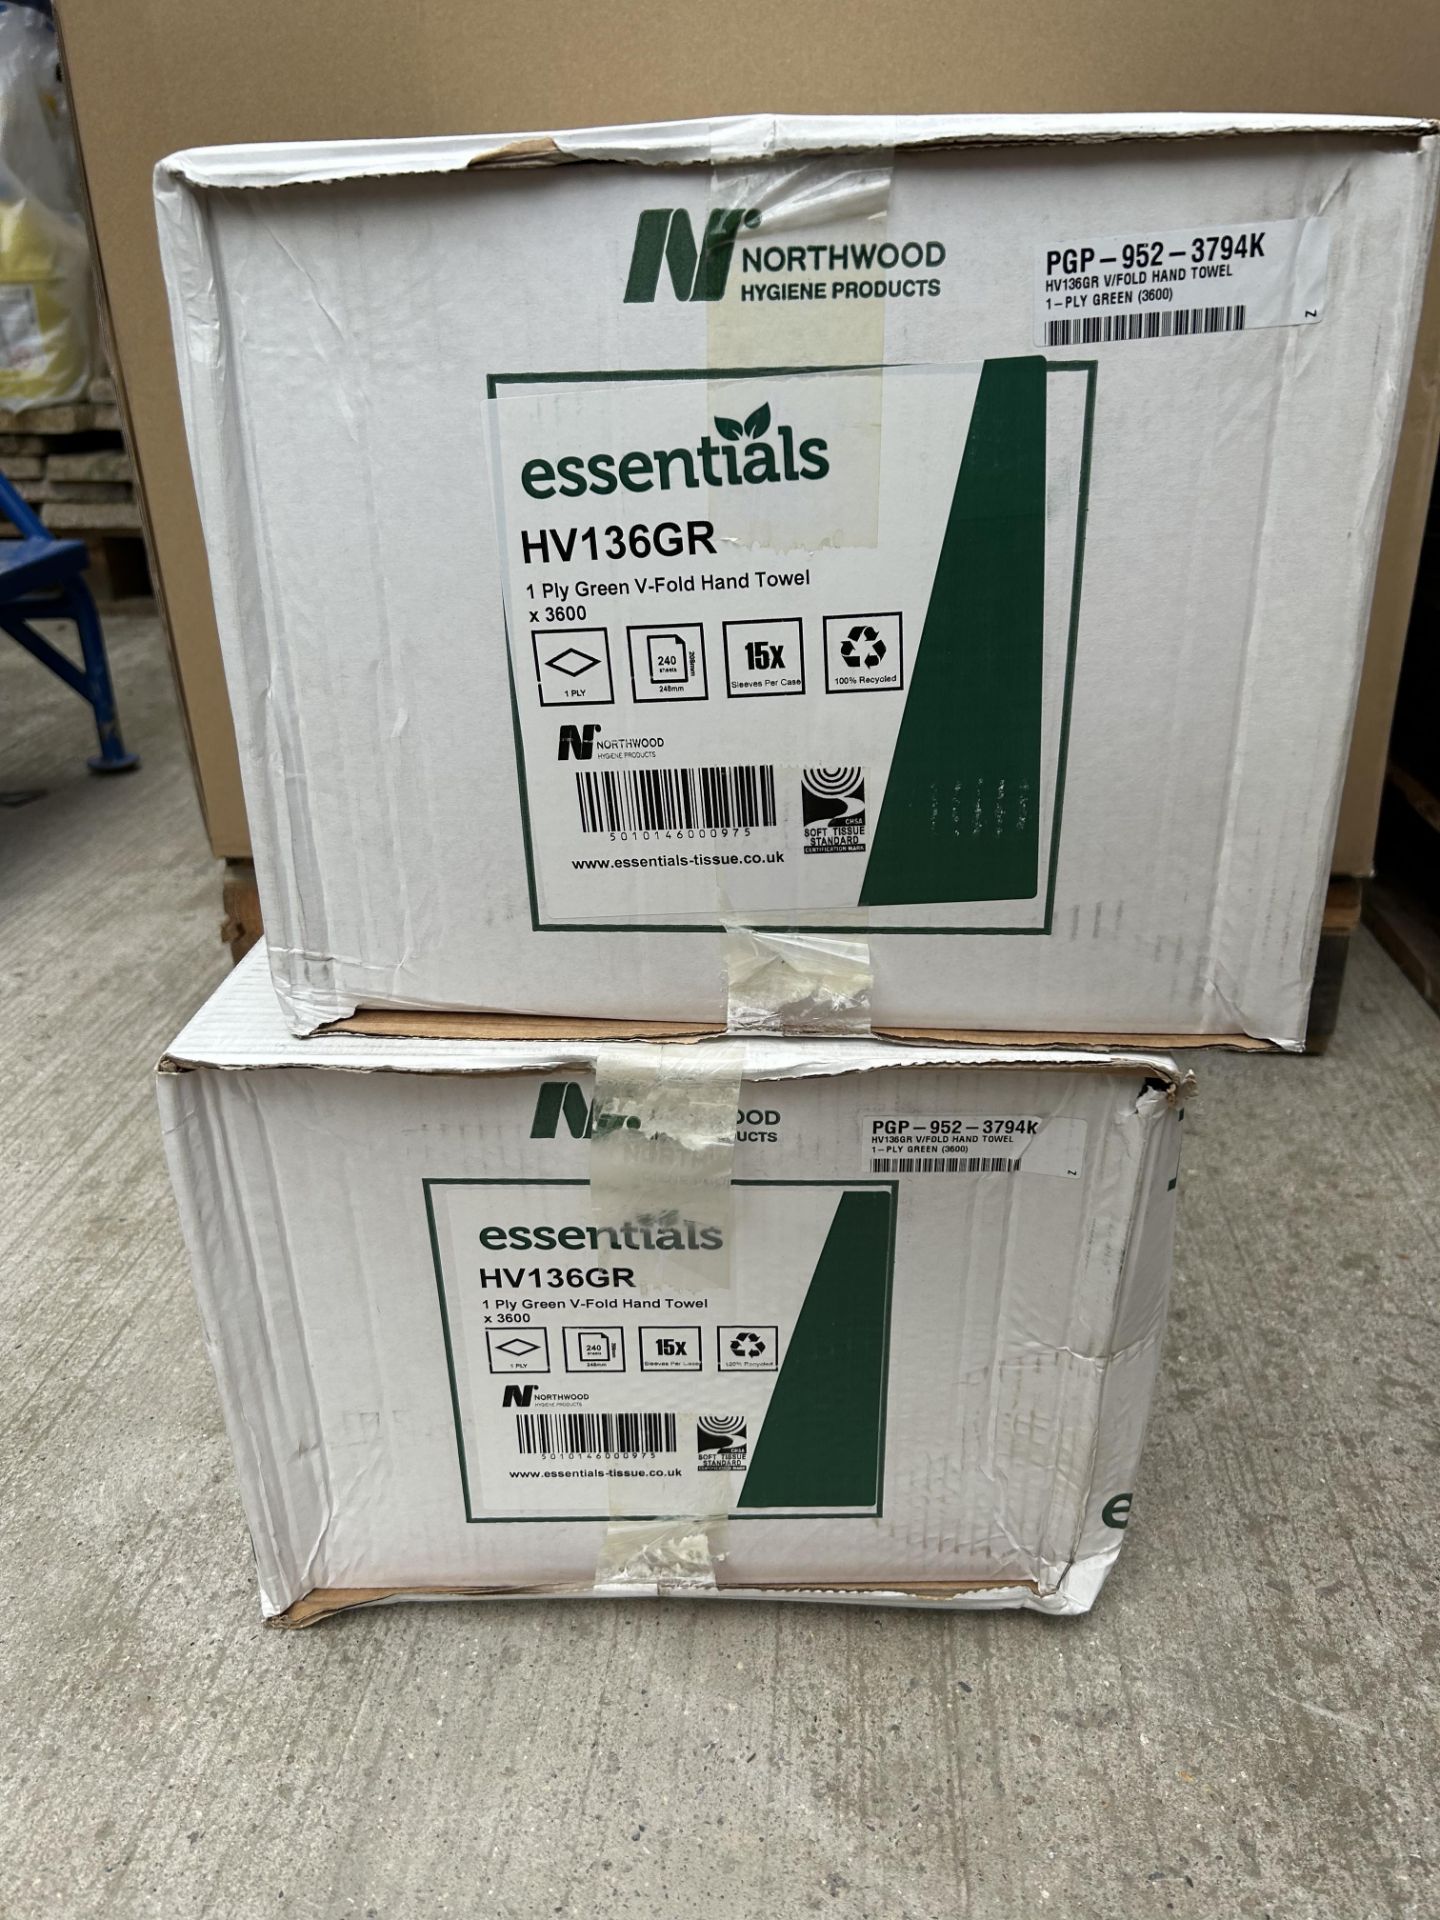 2x BOXES OF NORTHWOOD ESSENTIALS HV136GR 1PLY GREEN V-FOLD HAND TOWEL (Each box contains x3600) NEW